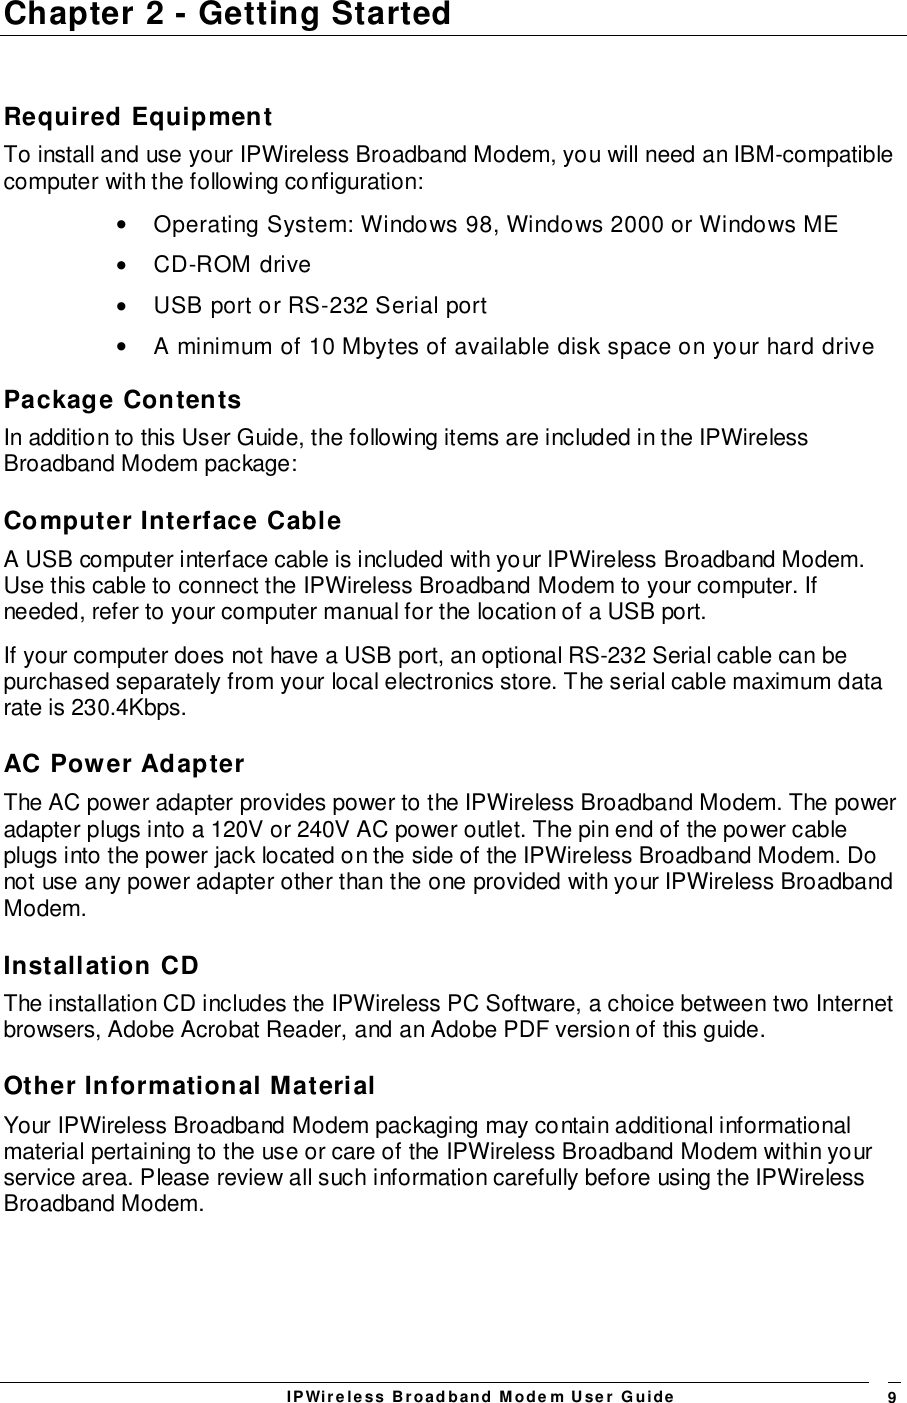 IPWireless Broadband Modem User Guide 9Chapter 2 - Getting StartedRequired EquipmentTo install and use your IPWireless Broadband Modem, you will need an IBM-compatiblecomputer with the following configuration:•  Operating System: Windows 98, Windows 2000 or Windows ME• CD-ROM drive•  USB port or RS-232 Serial port•  A minimum of 10 Mbytes of available disk space on your hard drivePackage ContentsIn addition to this User Guide, the following items are included in the IPWirelessBroadband Modem package:Computer Interface CableA USB computer interface cable is included with your IPWireless Broadband Modem.Use this cable to connect the IPWireless Broadband Modem to your computer. Ifneeded, refer to your computer manual for the location of a USB port.If your computer does not have a USB port, an optional RS-232 Serial cable can bepurchased separately from your local electronics store. The serial cable maximum datarate is 230.4Kbps.AC Power AdapterThe AC power adapter provides power to the IPWireless Broadband Modem. The poweradapter plugs into a 120V or 240V AC power outlet. The pin end of the power cableplugs into the power jack located on the side of the IPWireless Broadband Modem. Donot use any power adapter other than the one provided with your IPWireless BroadbandModem.Installation CDThe installation CD includes the IPWireless PC Software, a choice between two Internetbrowsers, Adobe Acrobat Reader, and an Adobe PDF version of this guide.Other Informational MaterialYour IPWireless Broadband Modem packaging may contain additional informationalmaterial pertaining to the use or care of the IPWireless Broadband Modem within yourservice area. Please review all such information carefully before using the IPWirelessBroadband Modem.